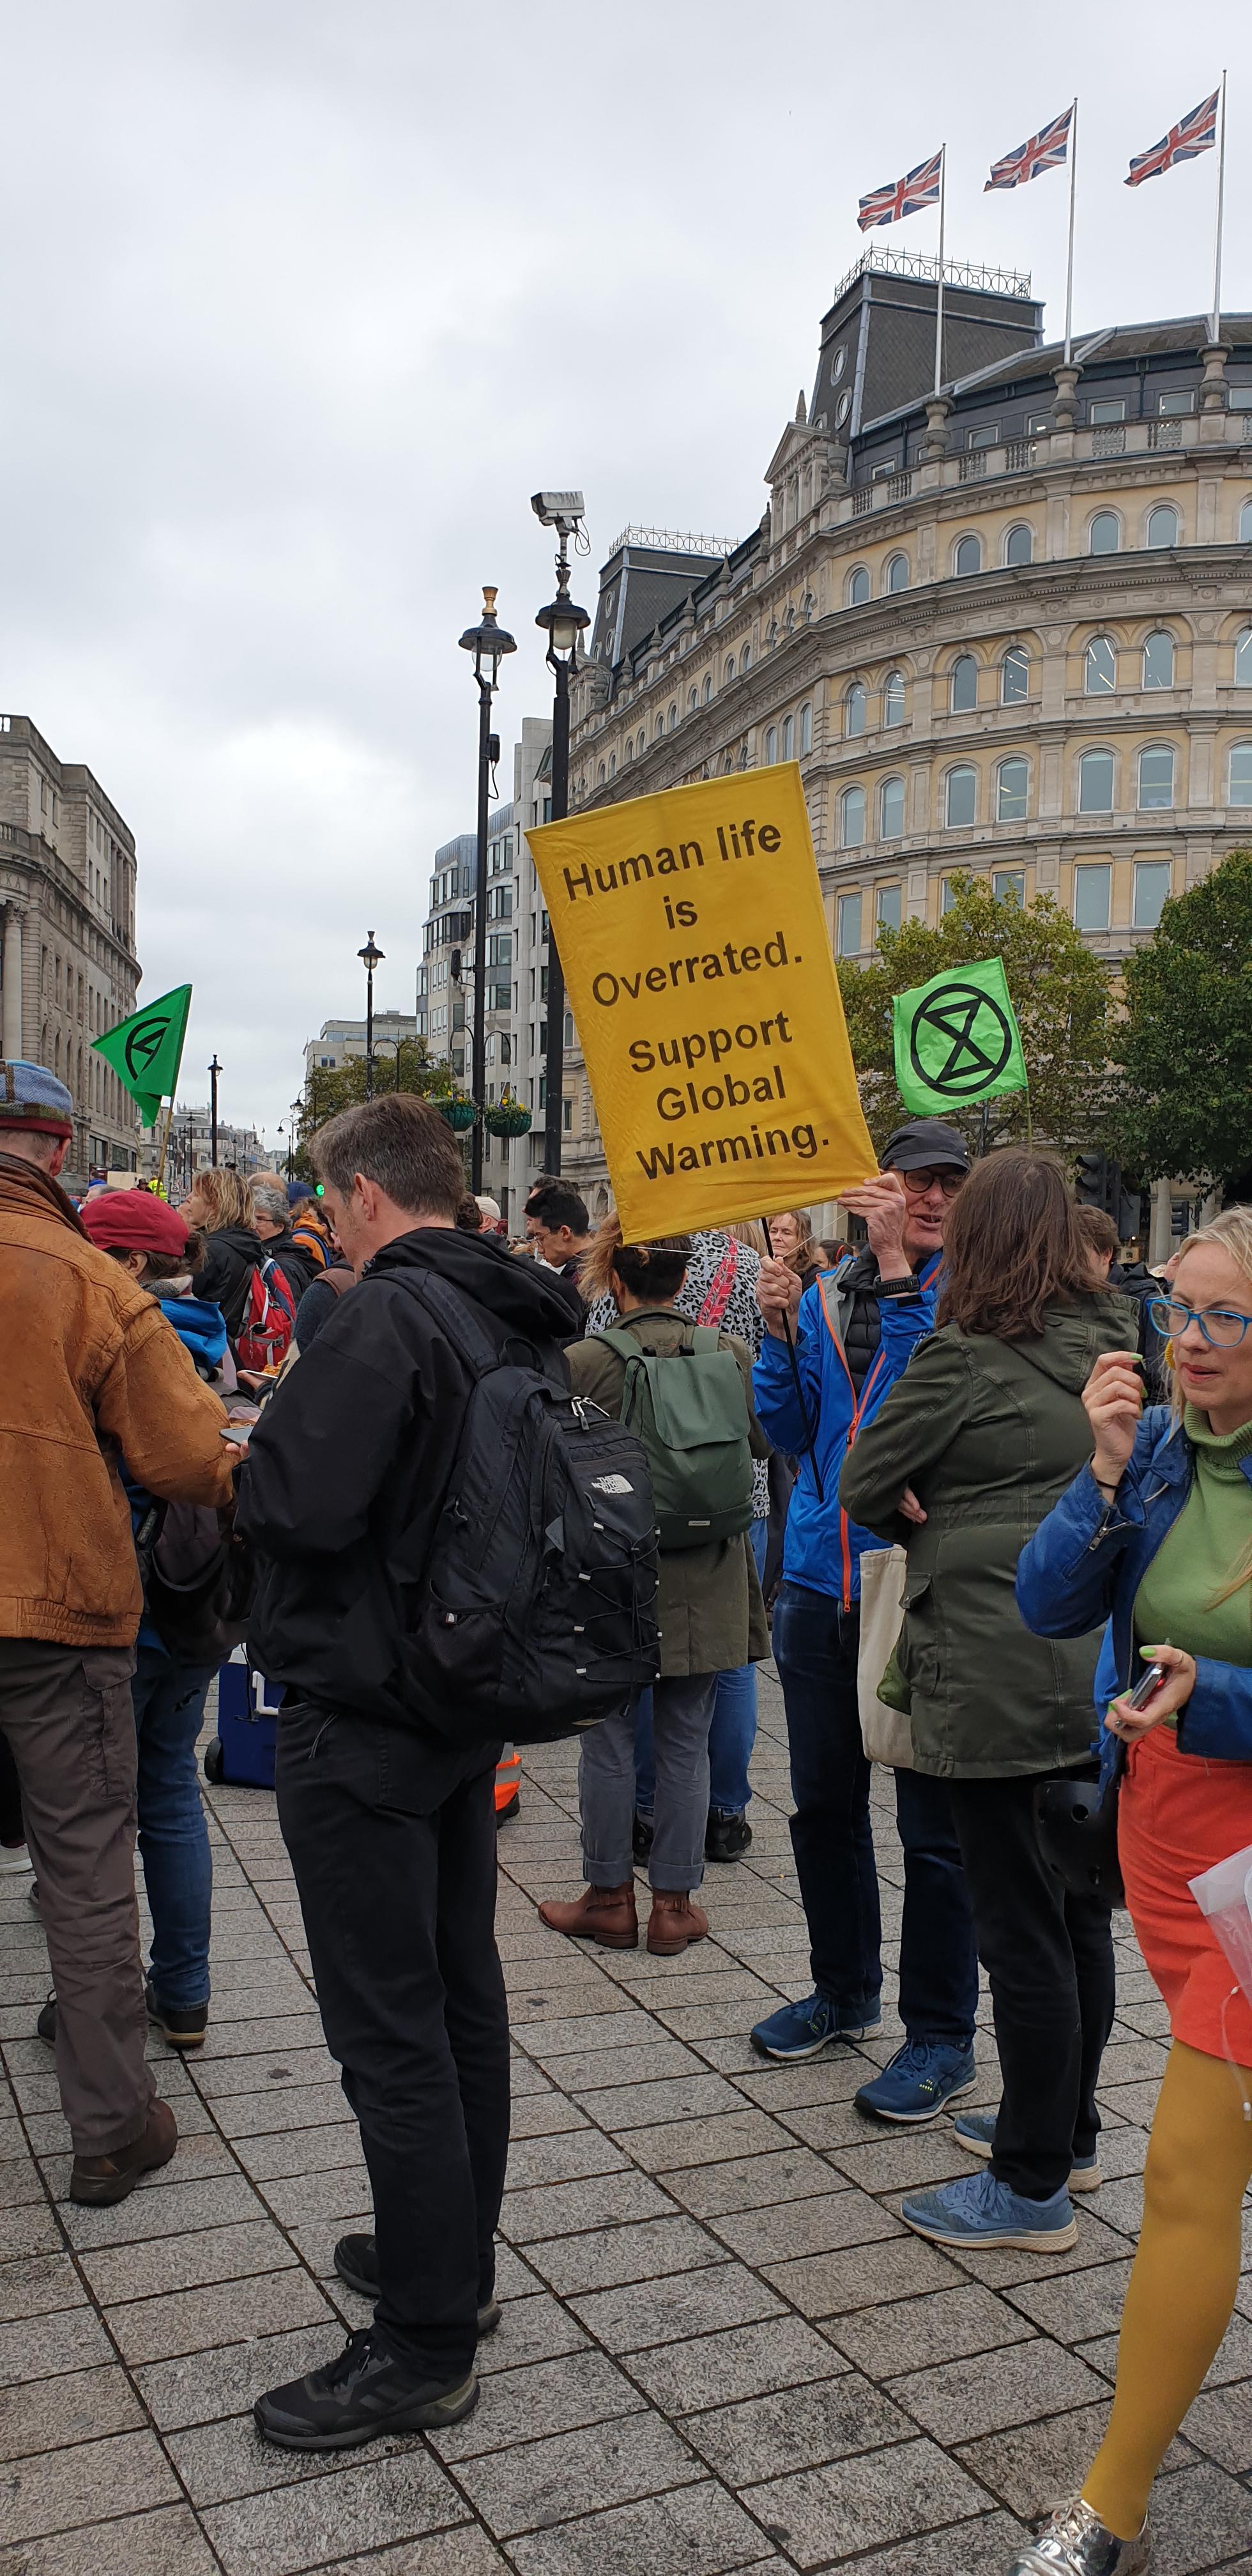 Sarcastic, though actually realistic, placard at the Global Climate Strike, Trafalgar Square, London, September 20, 2019.